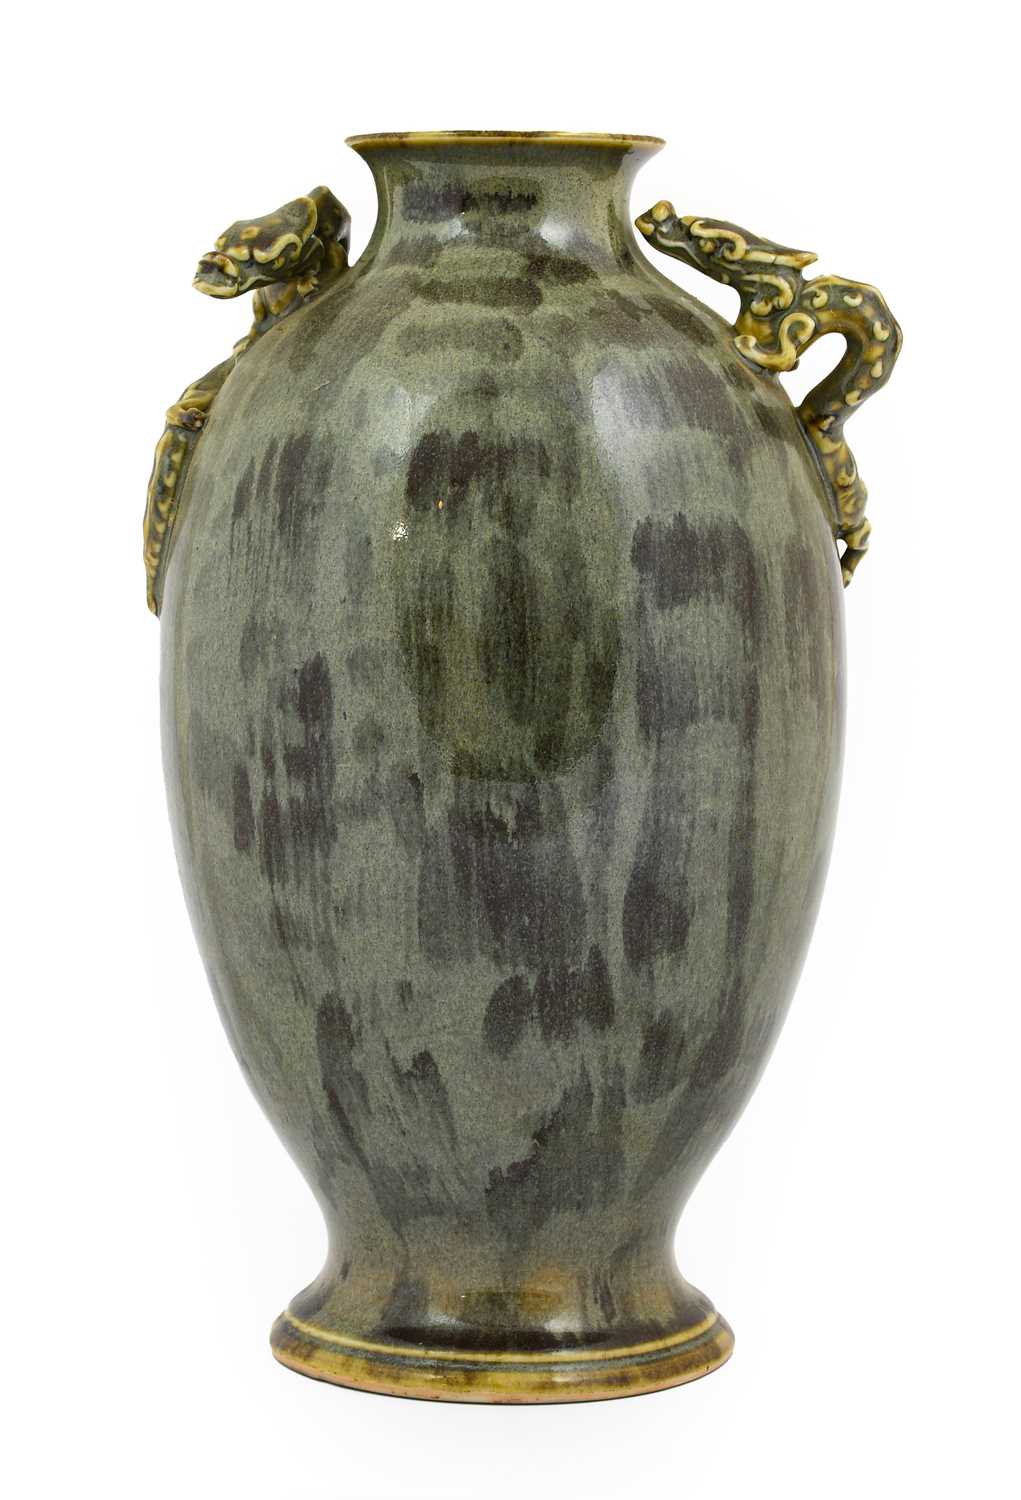 A Japanese Porcelain Vase, Meiji period, of baluster form with flared neck, the shoulders applied